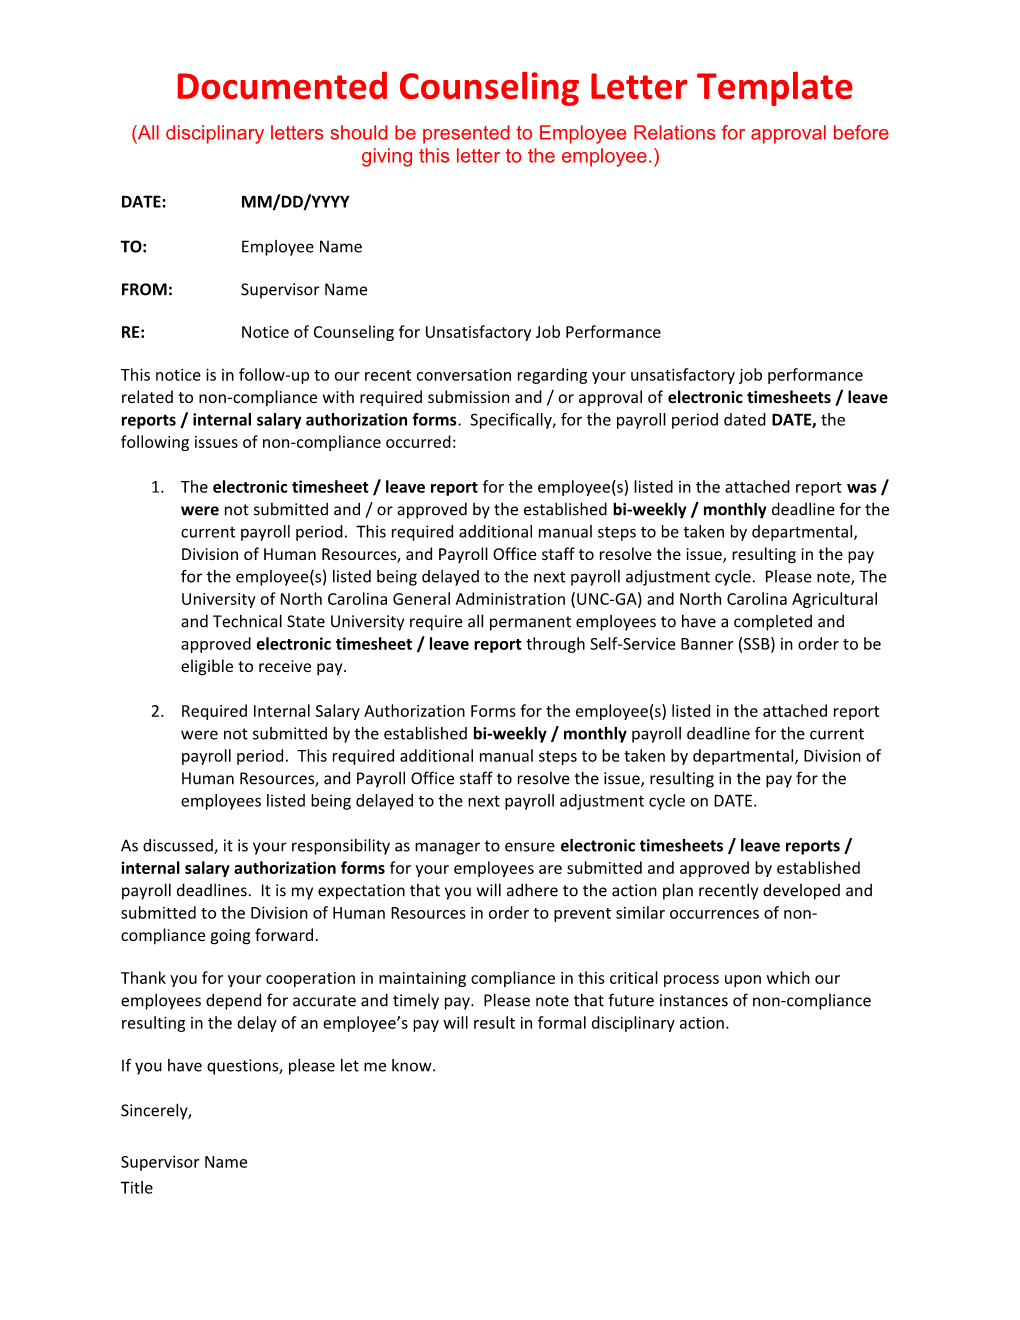 Documented Counseling Letter Template